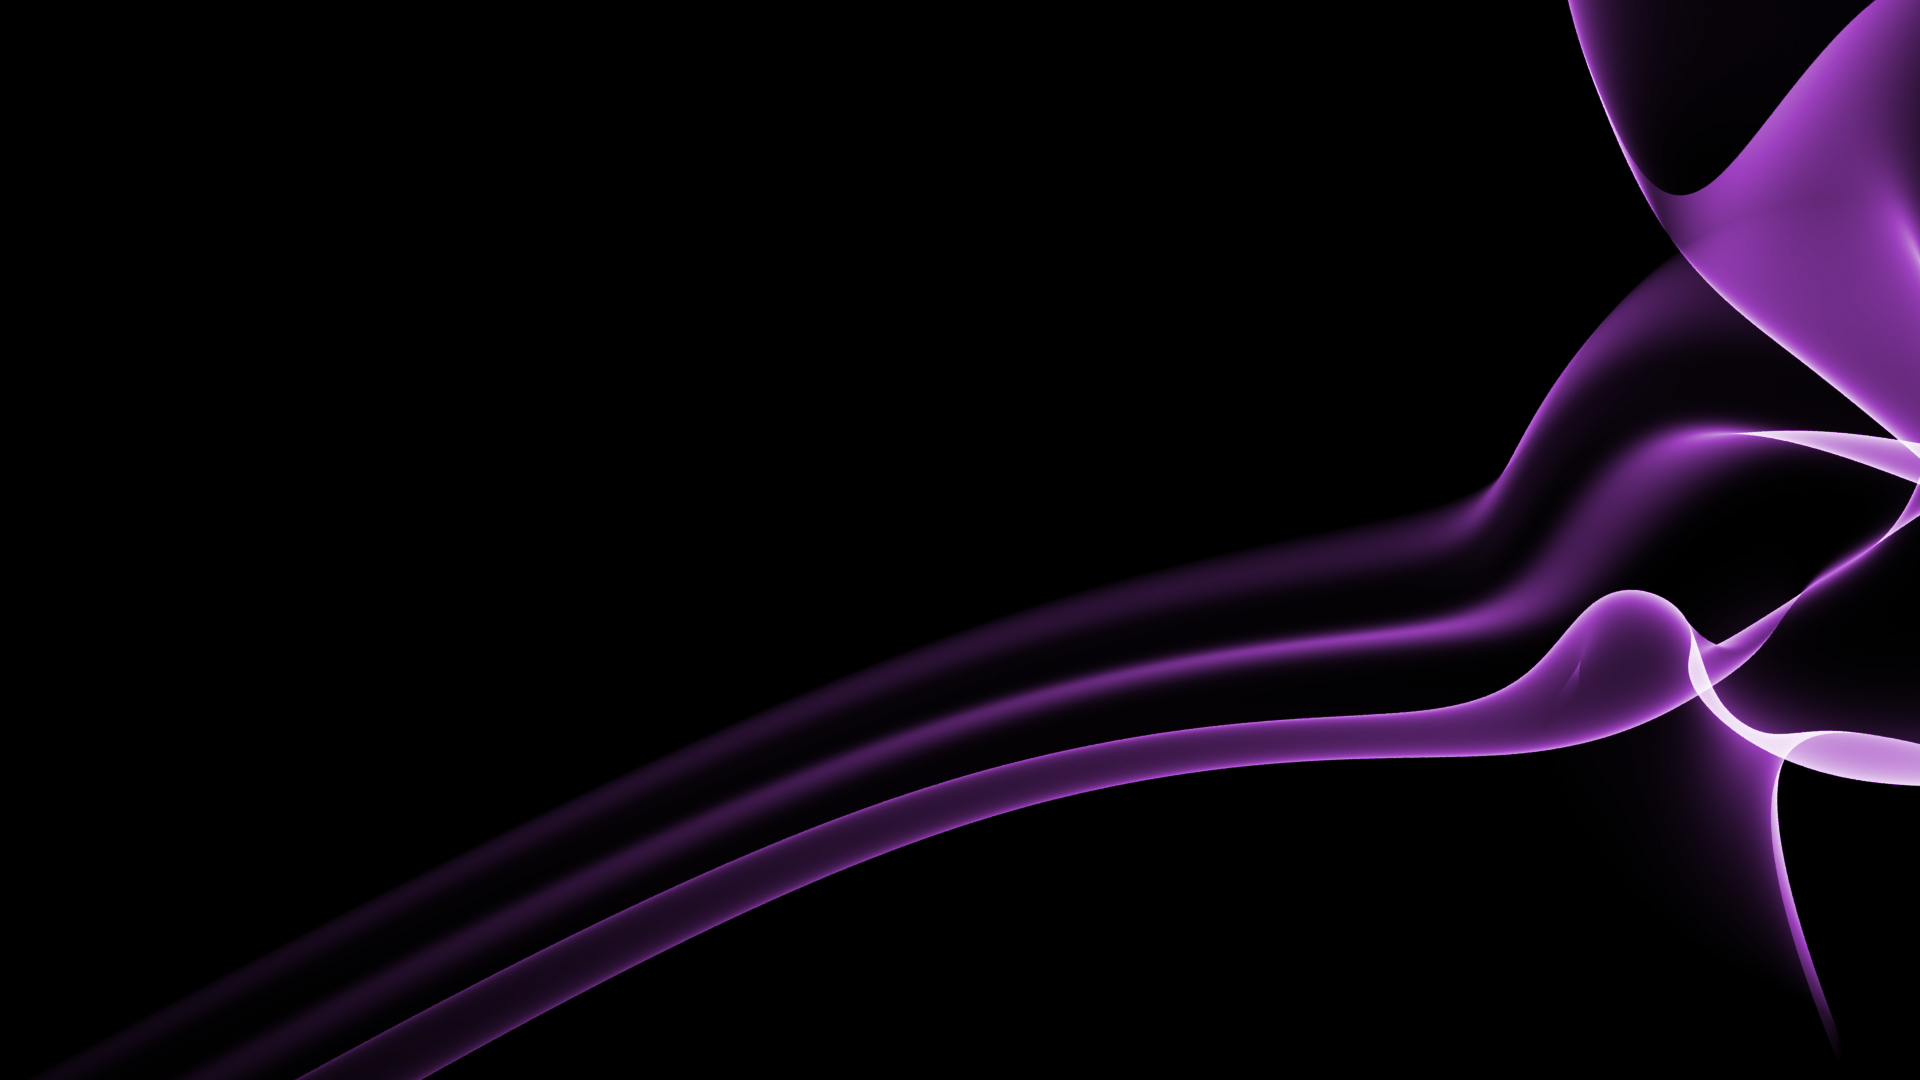 Wallpapers For Dark Purple And Black Backgrounds